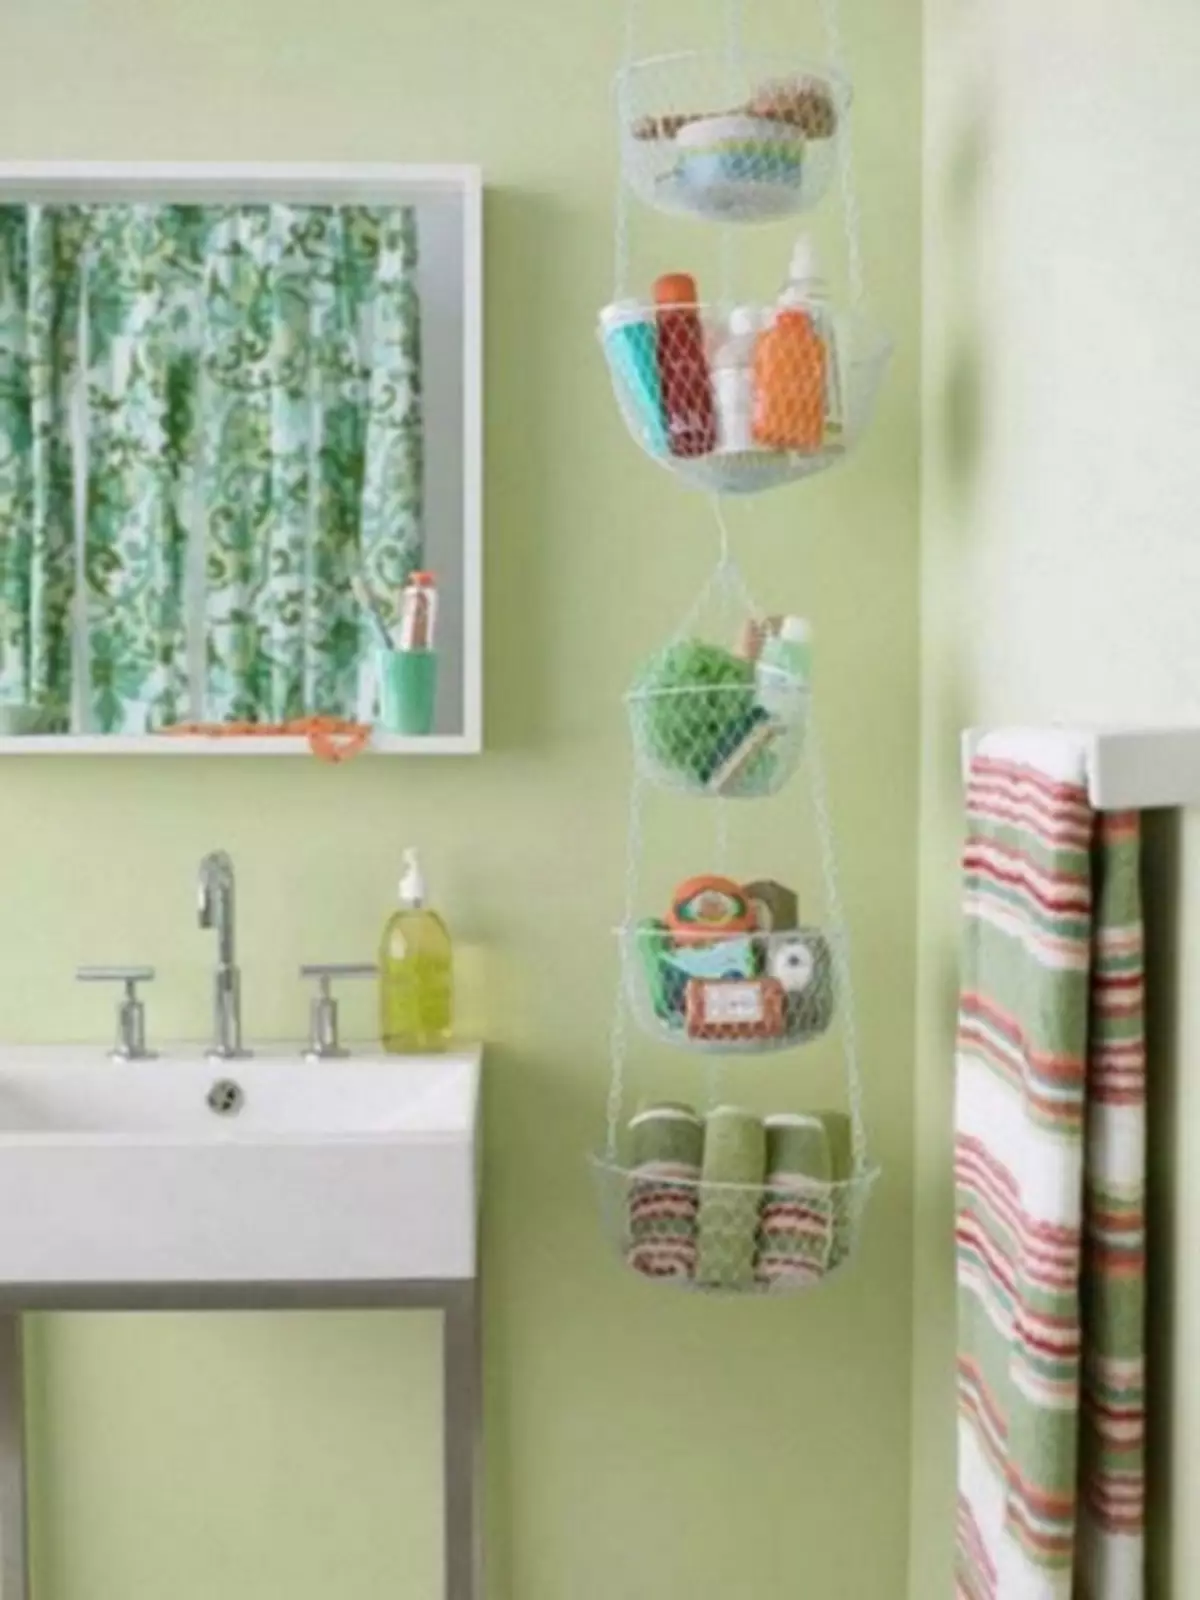 Shelves, boxes, baskets racks and other ideas for storing things in the bathroom (50 photos)